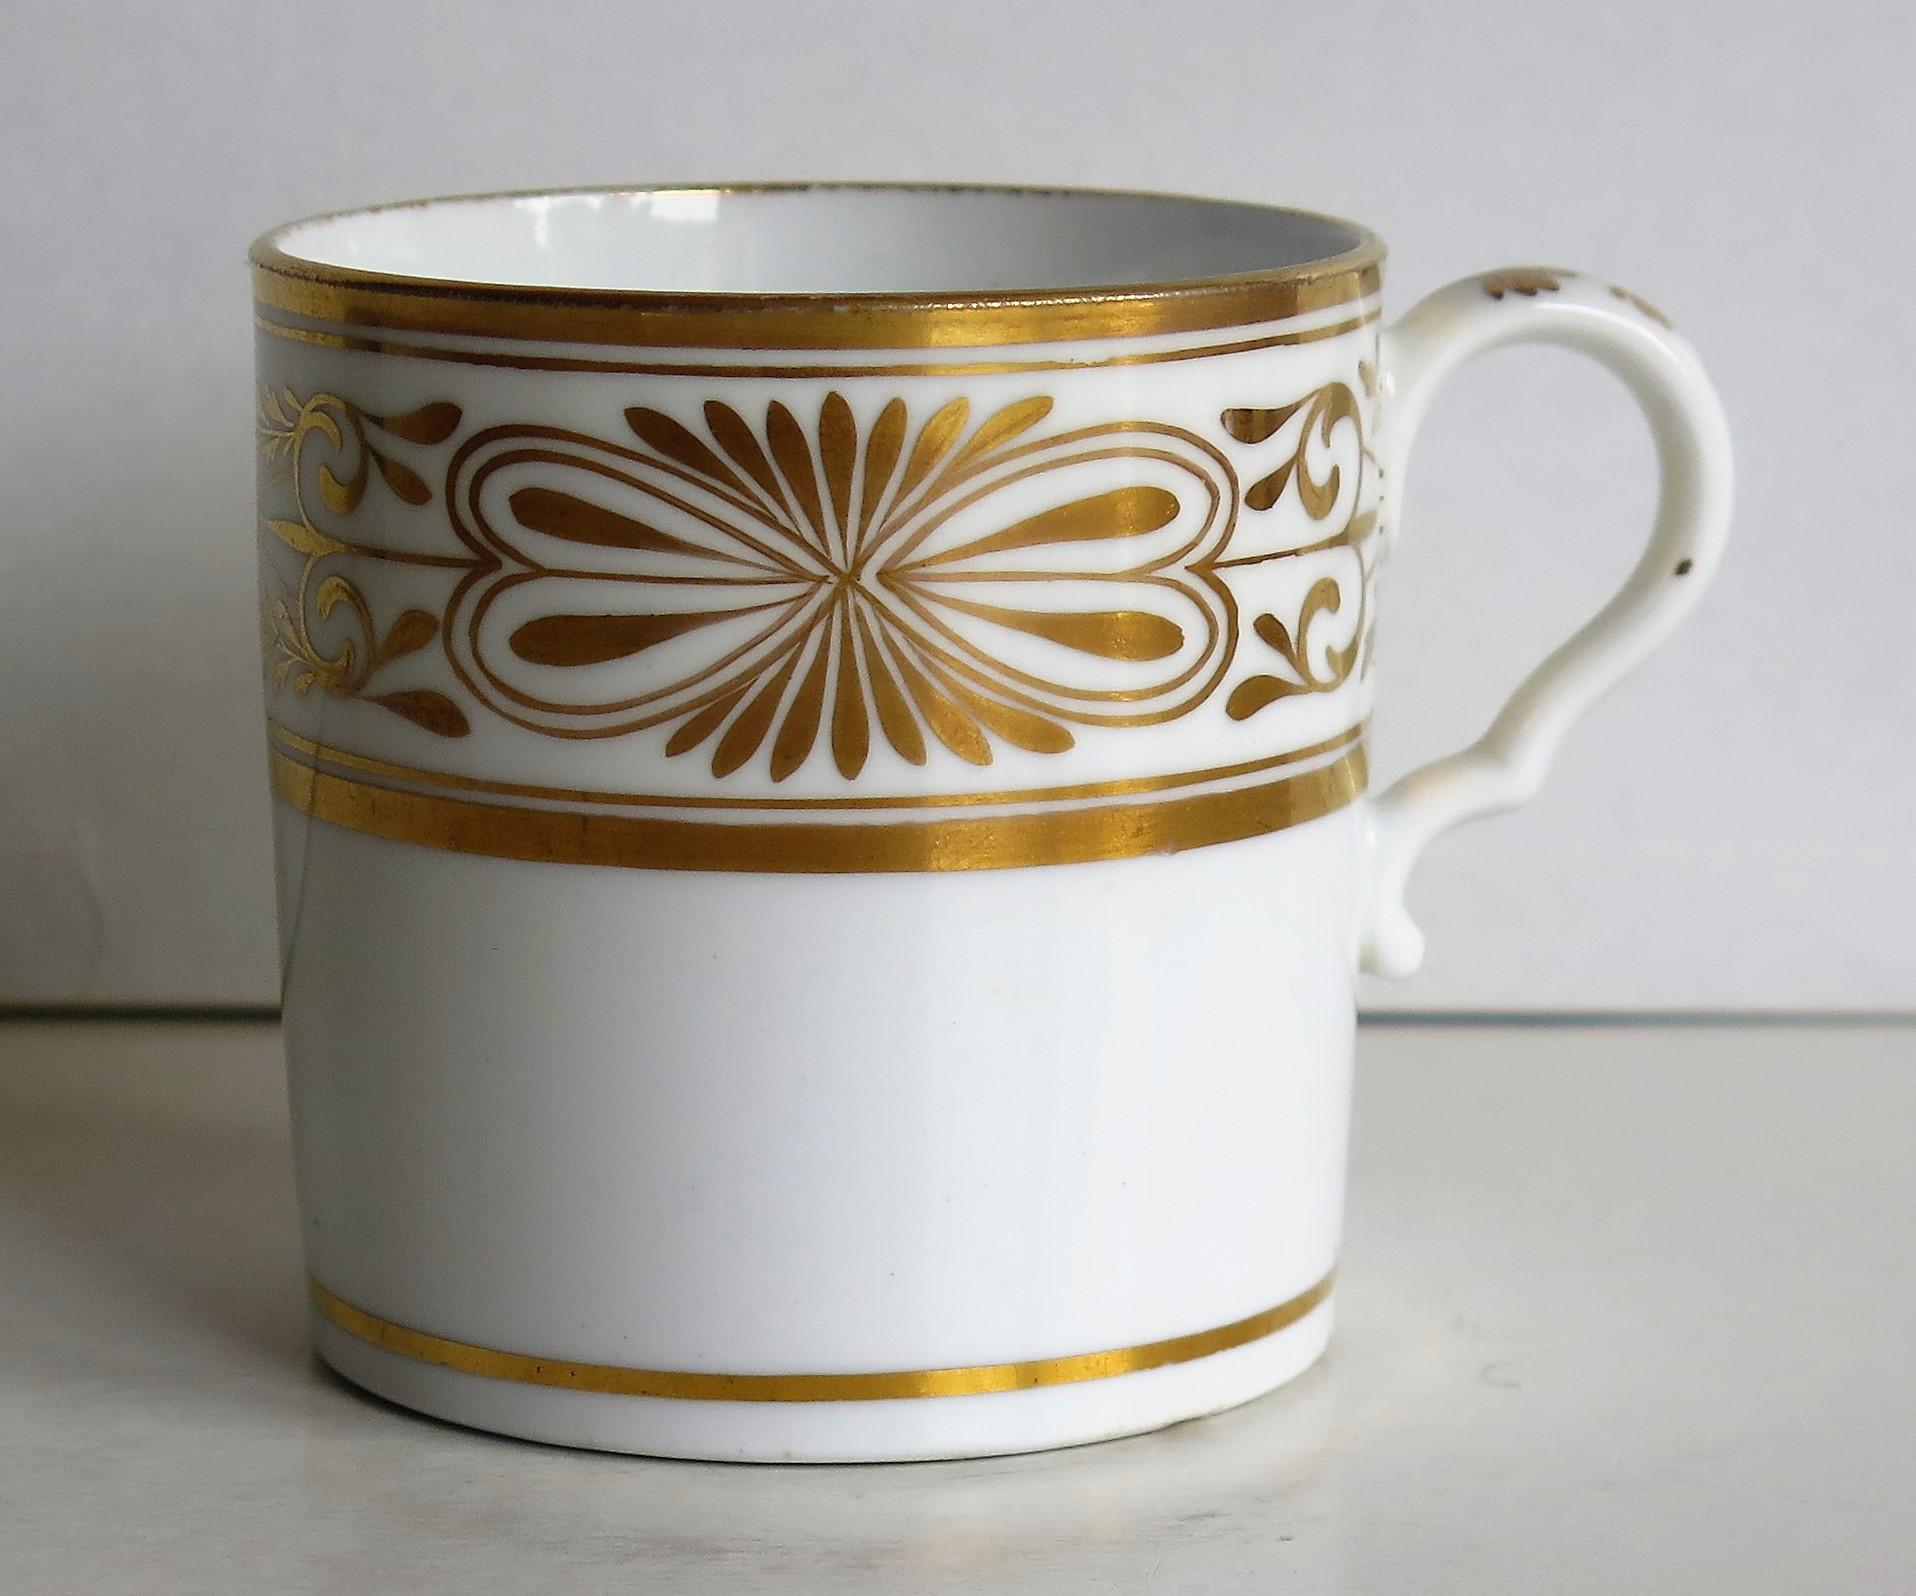 This is a fine example of an English George III period, porcelain, coffee can (cup), made by Spode in the early 19th century, circa 1810.

The can is nominally straight sided and has the Spode loop handle with a pronounced kick or kink to the